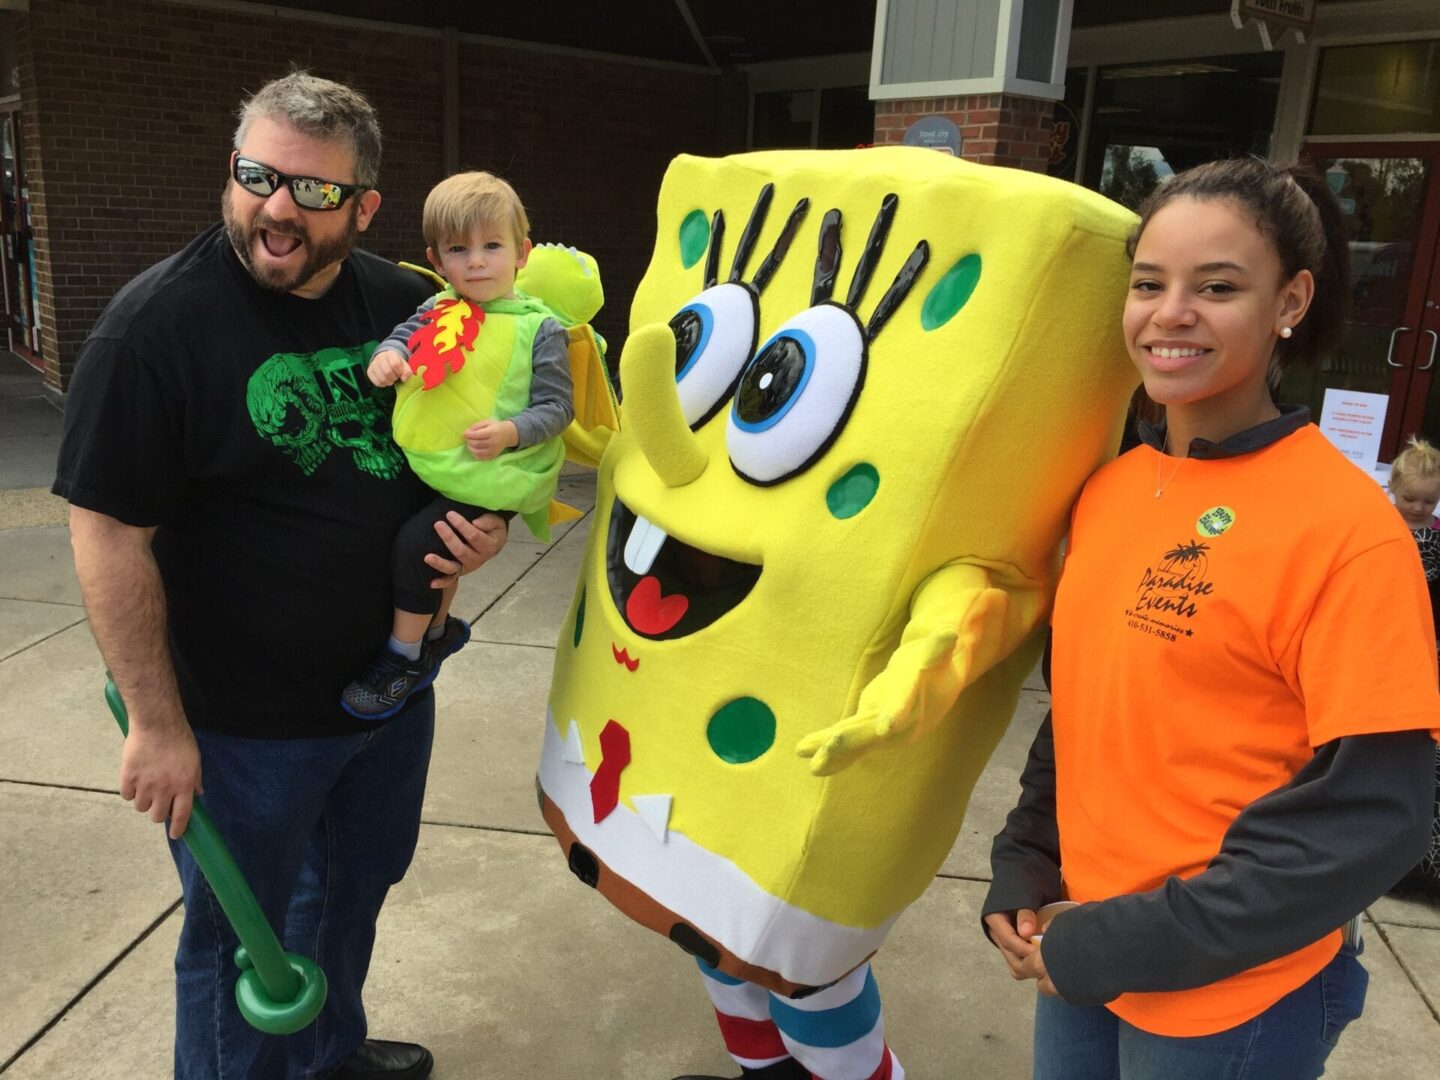 two people and a toddler posing with a spongebob squarepants mascot